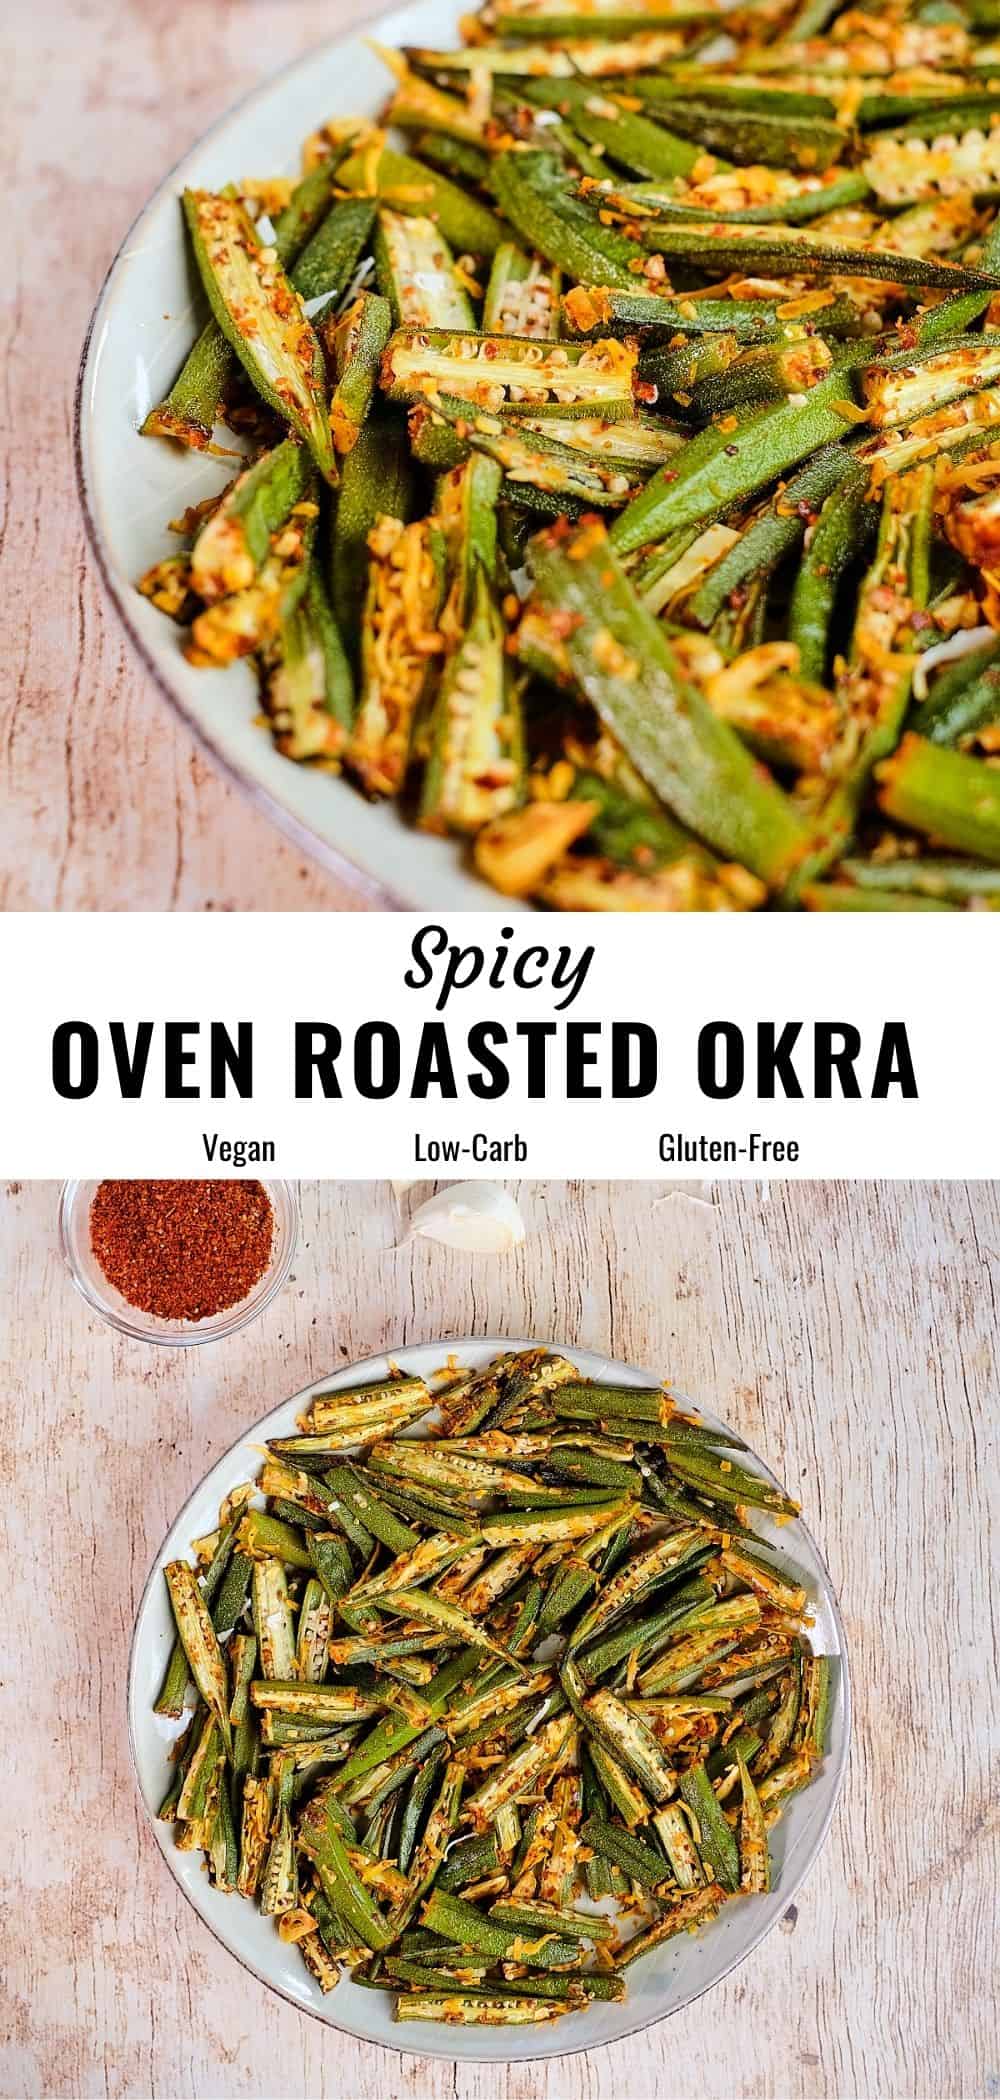 Spicy Oven Roasted Okra - The Delicious Crescent